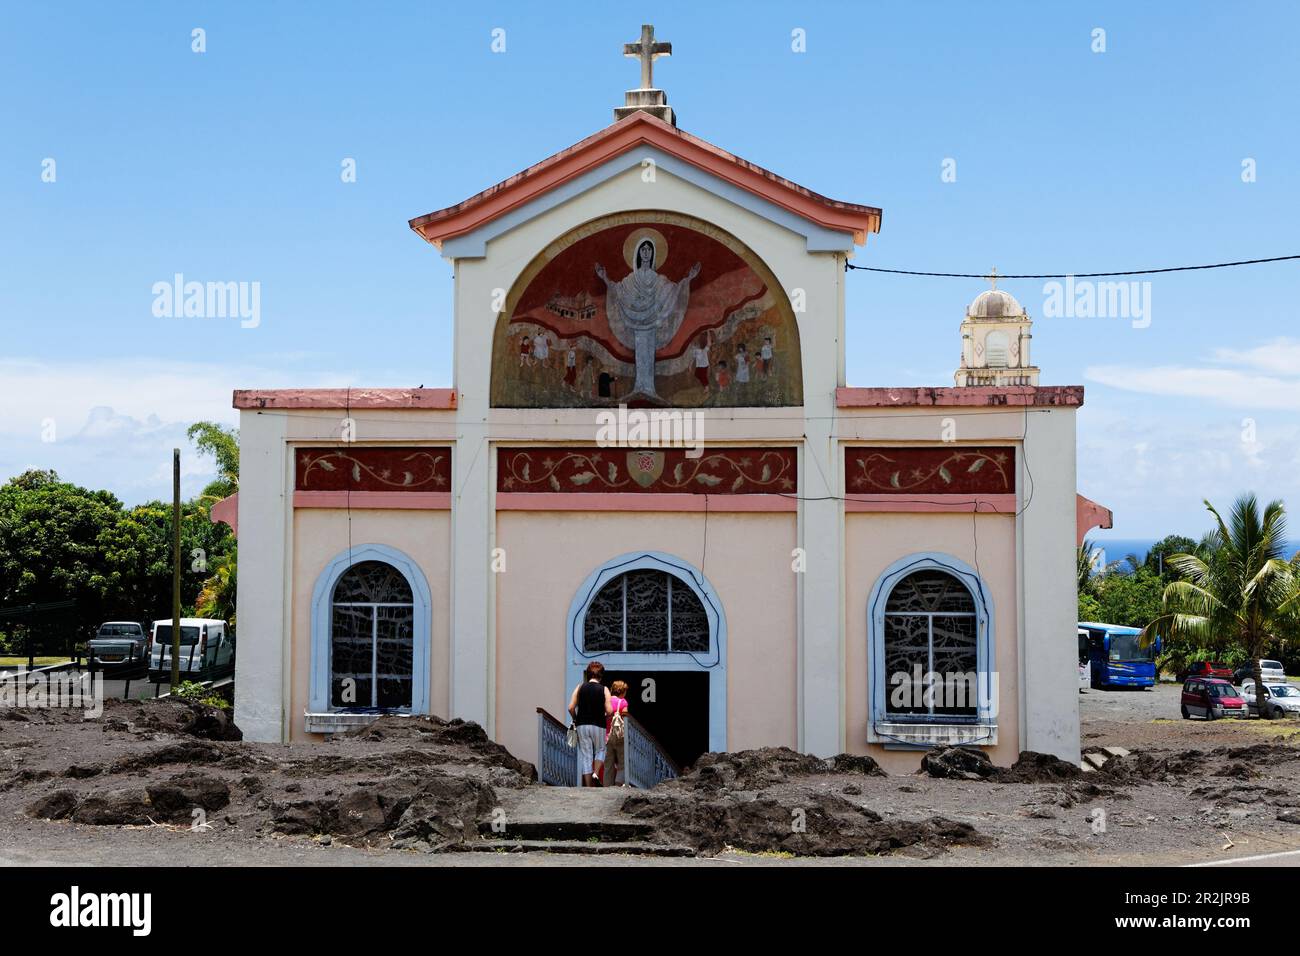 Flow of Lava at the church in Piton Sainte Rose, La Reunion, Indian Ocean Stock Photo